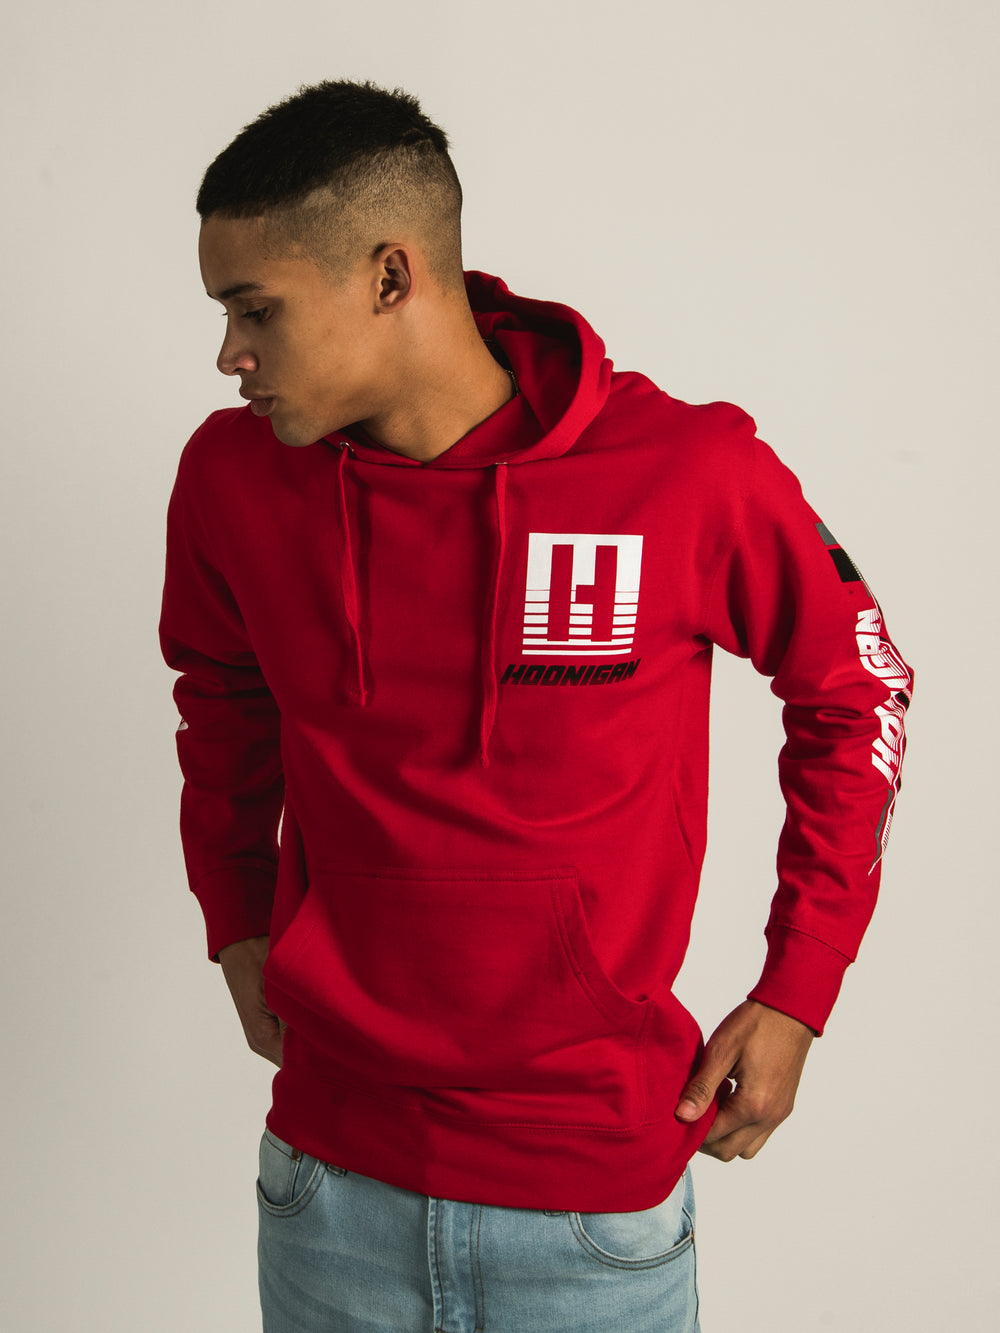 HOONIGAN 3RD GENERATION PULL OVER HOODIE - CLEARANCE